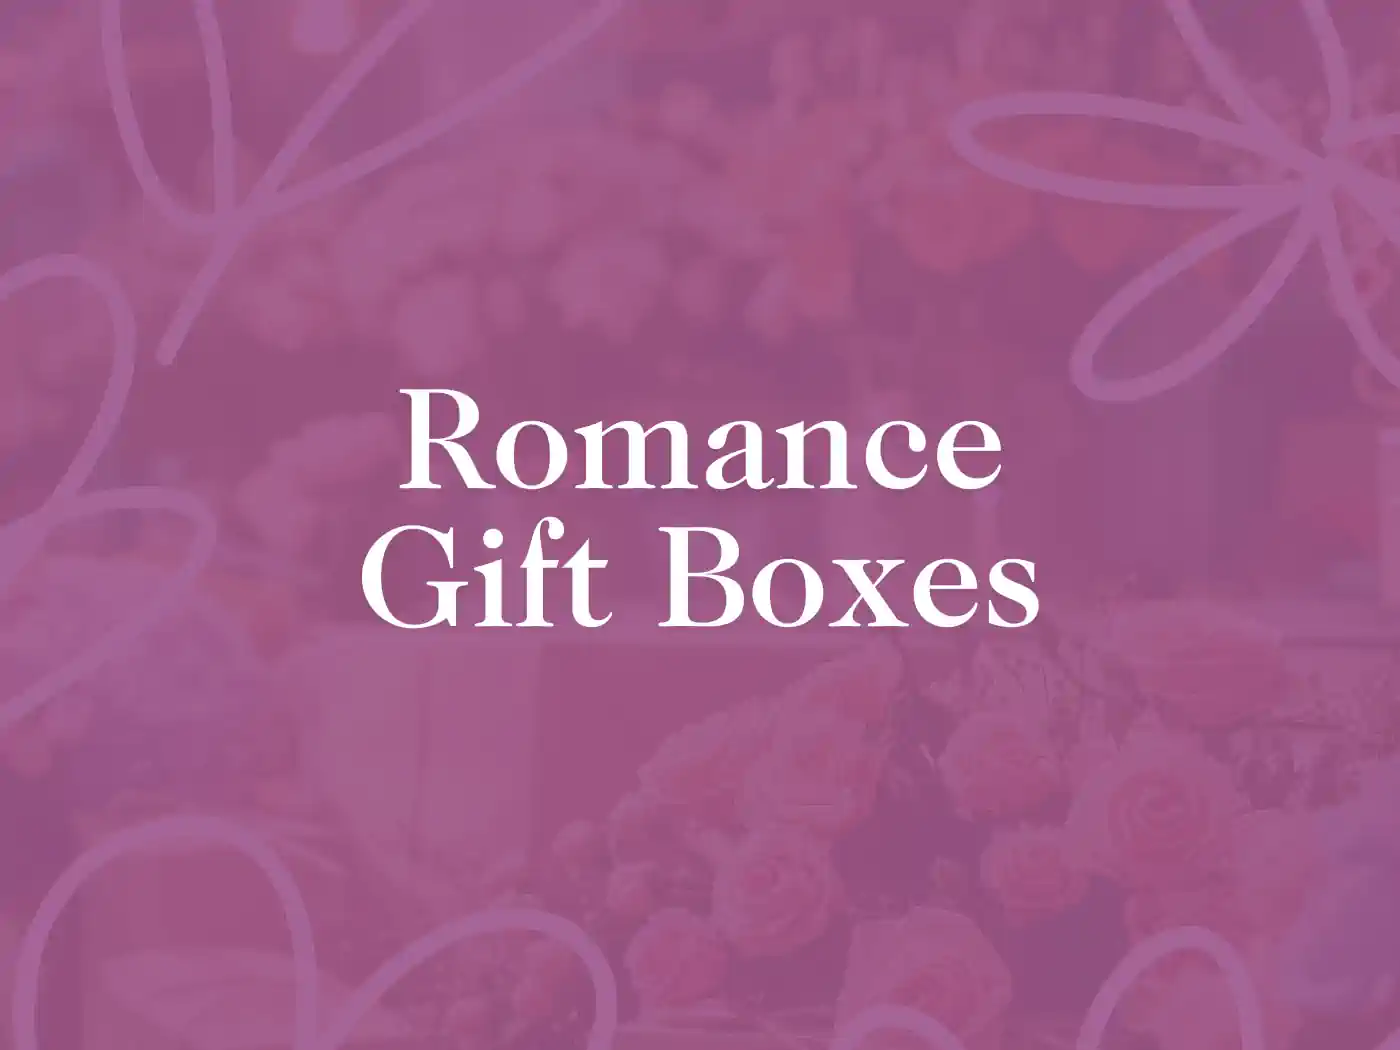 A beautifully decorated purple box labeled "Romance Gift Boxes," with delicate floral patterns in the background. Fabulous Flowers and Gifts. Romantic Gift Boxes.